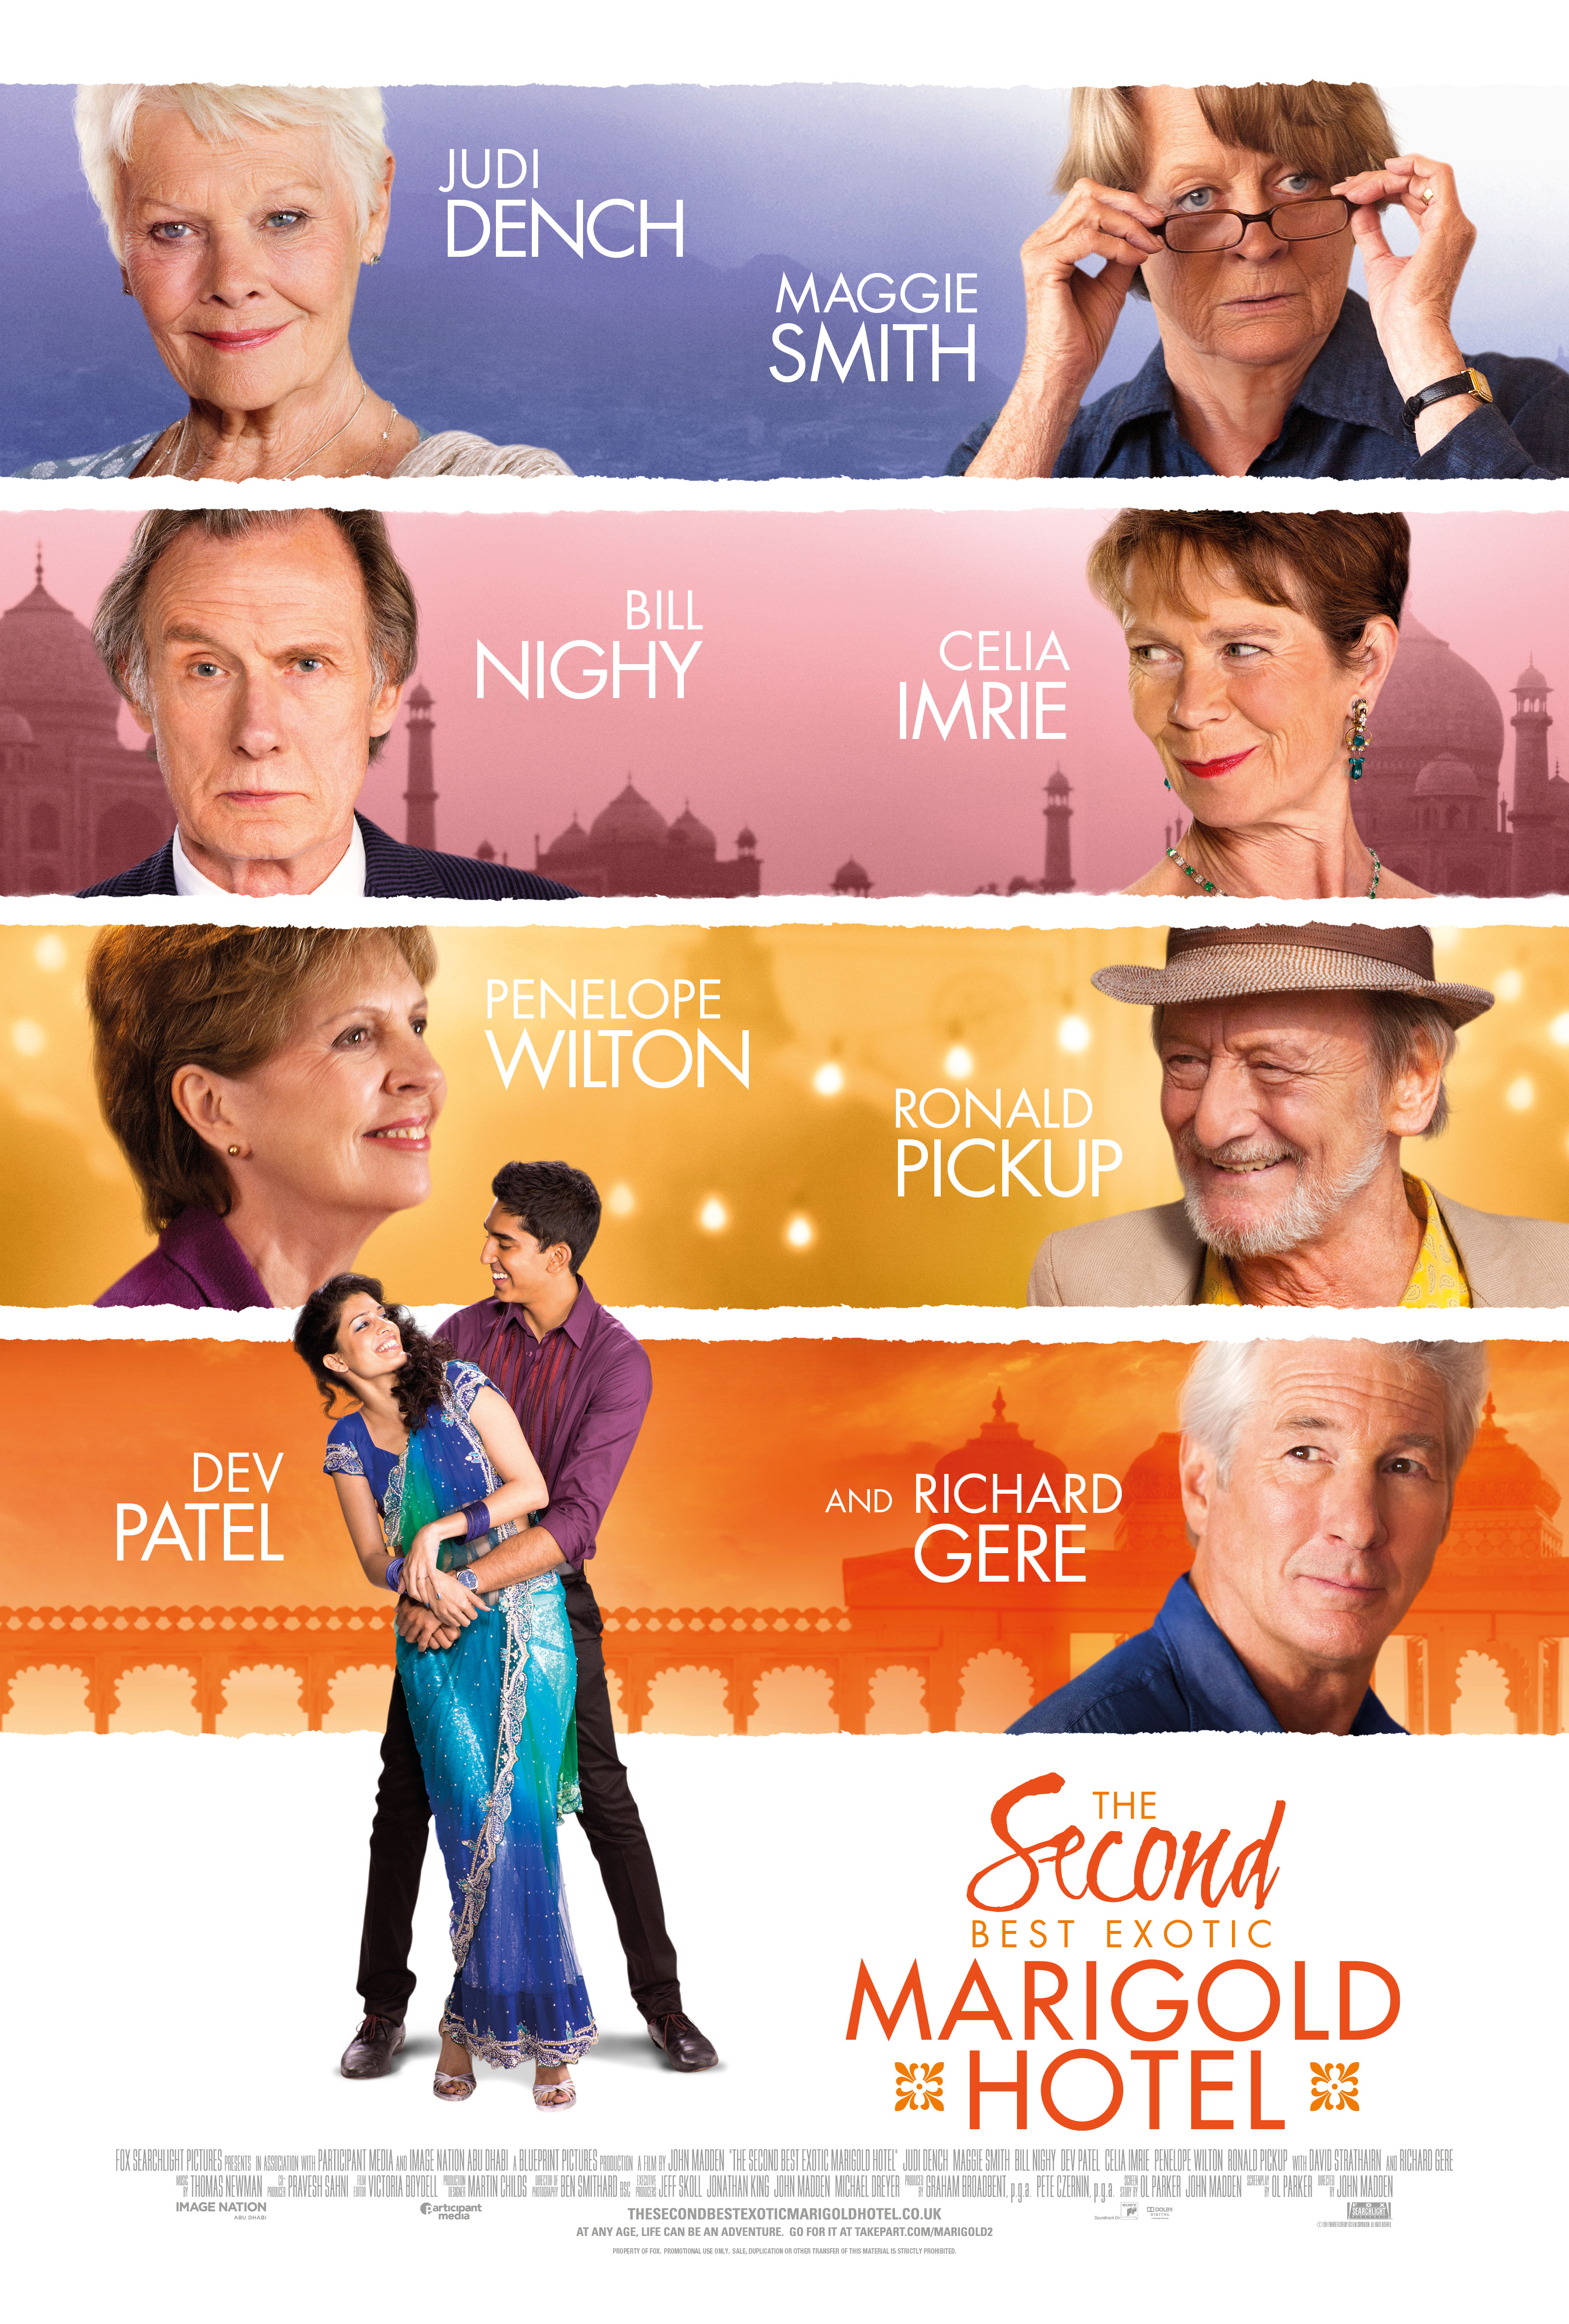 High Resolution Wallpaper | The Second Best Exotic Marigold Hotel 3189x4724 px